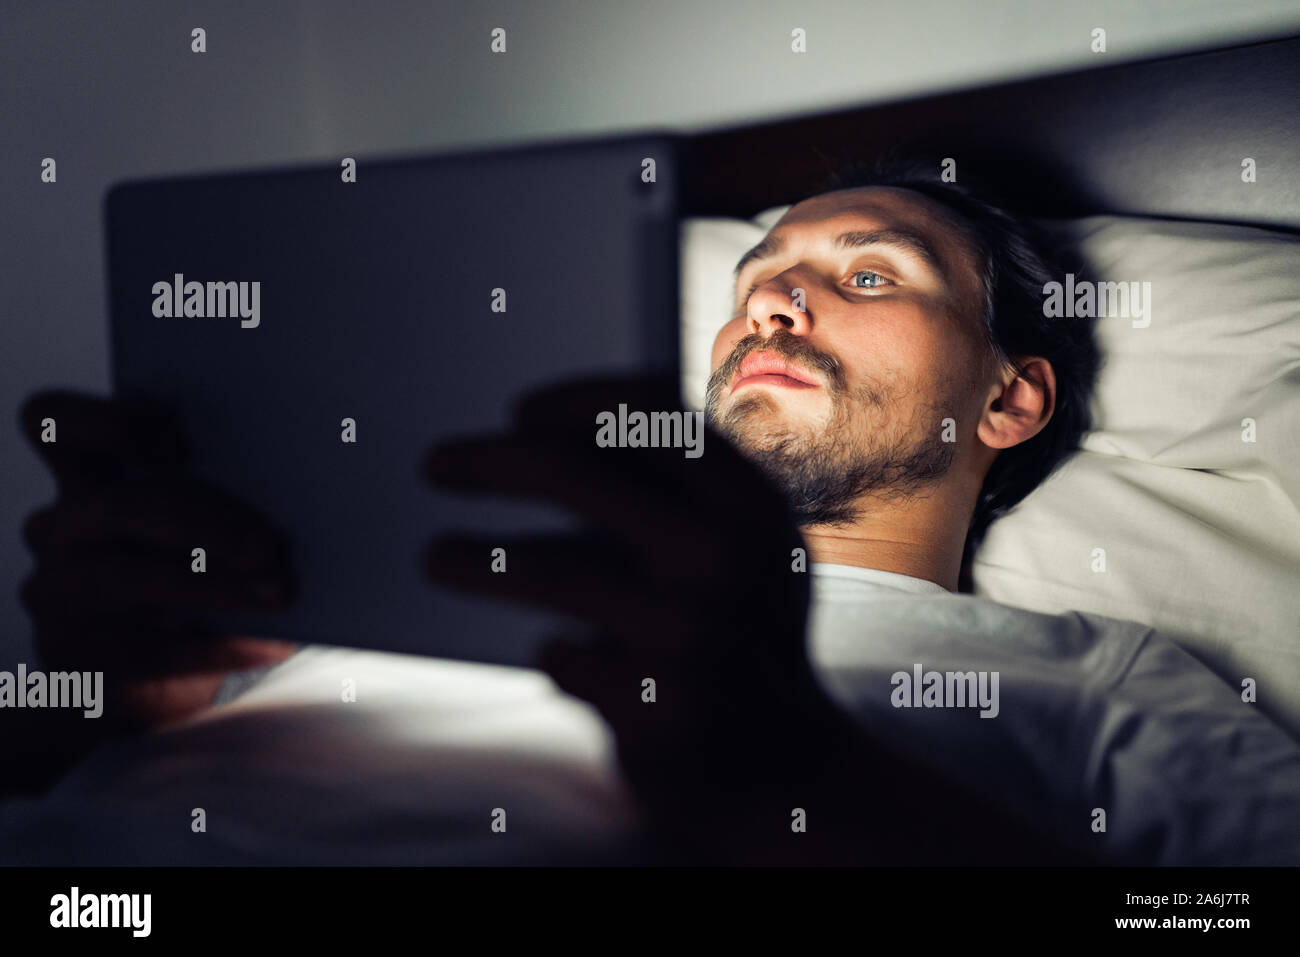 Young handsome and tired man with a beard cannot sleep and is watching something on his tablet at night. Stock Photo